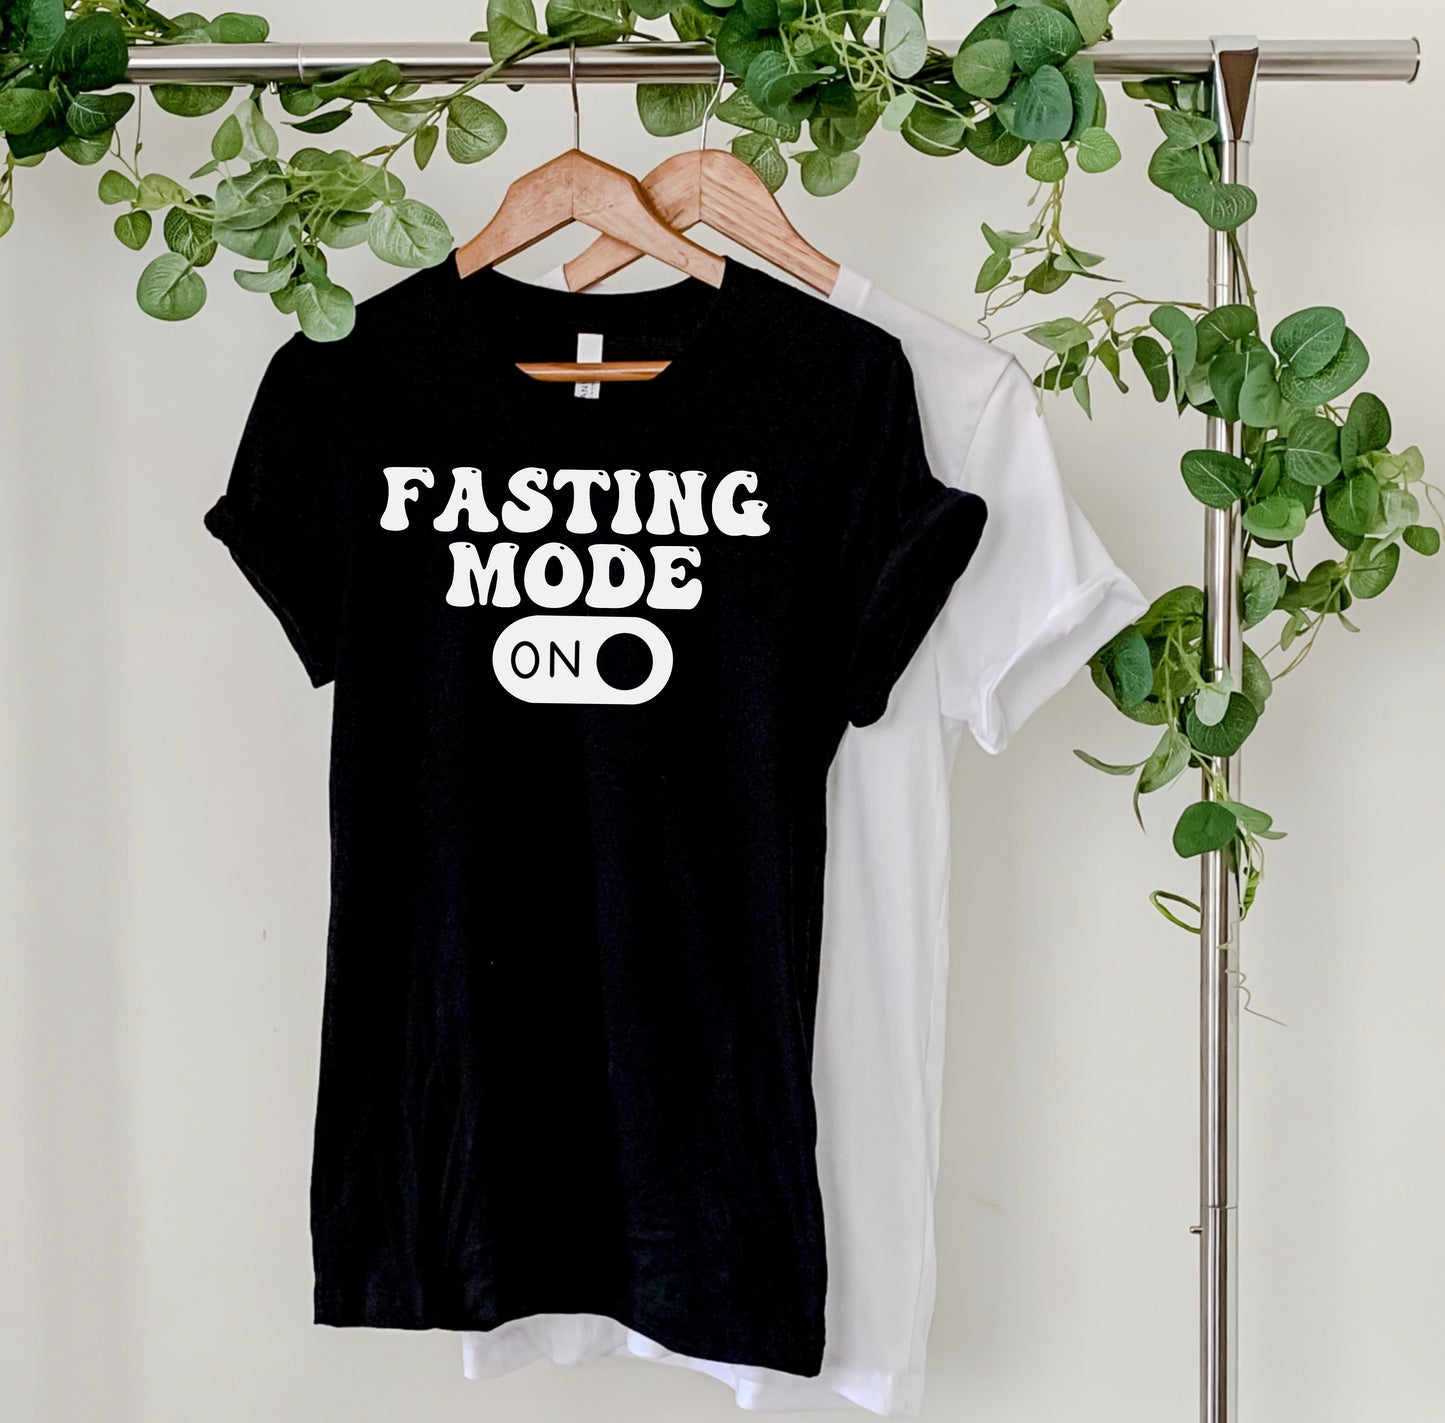 Fasting Mode On T-Shirt | Super Soft Funny Shirt | Health Fasting | Religious Fasting Shirt